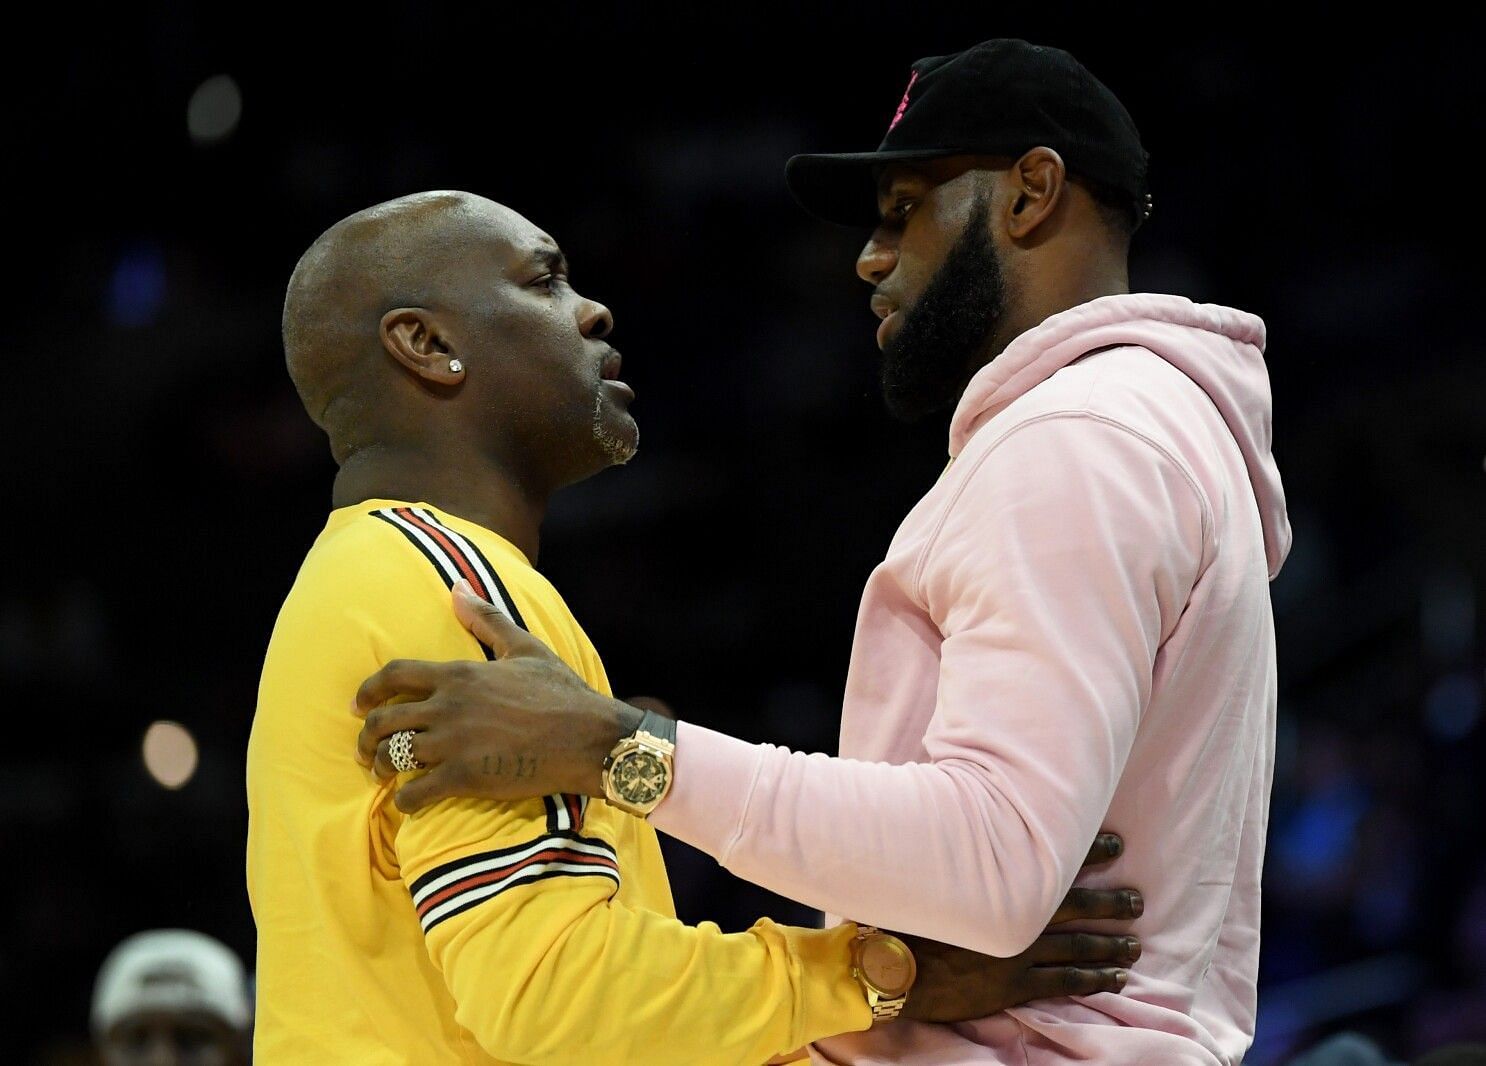 Gary Payton and LeBron James (right). (Photo Courtesy of The LA Times)